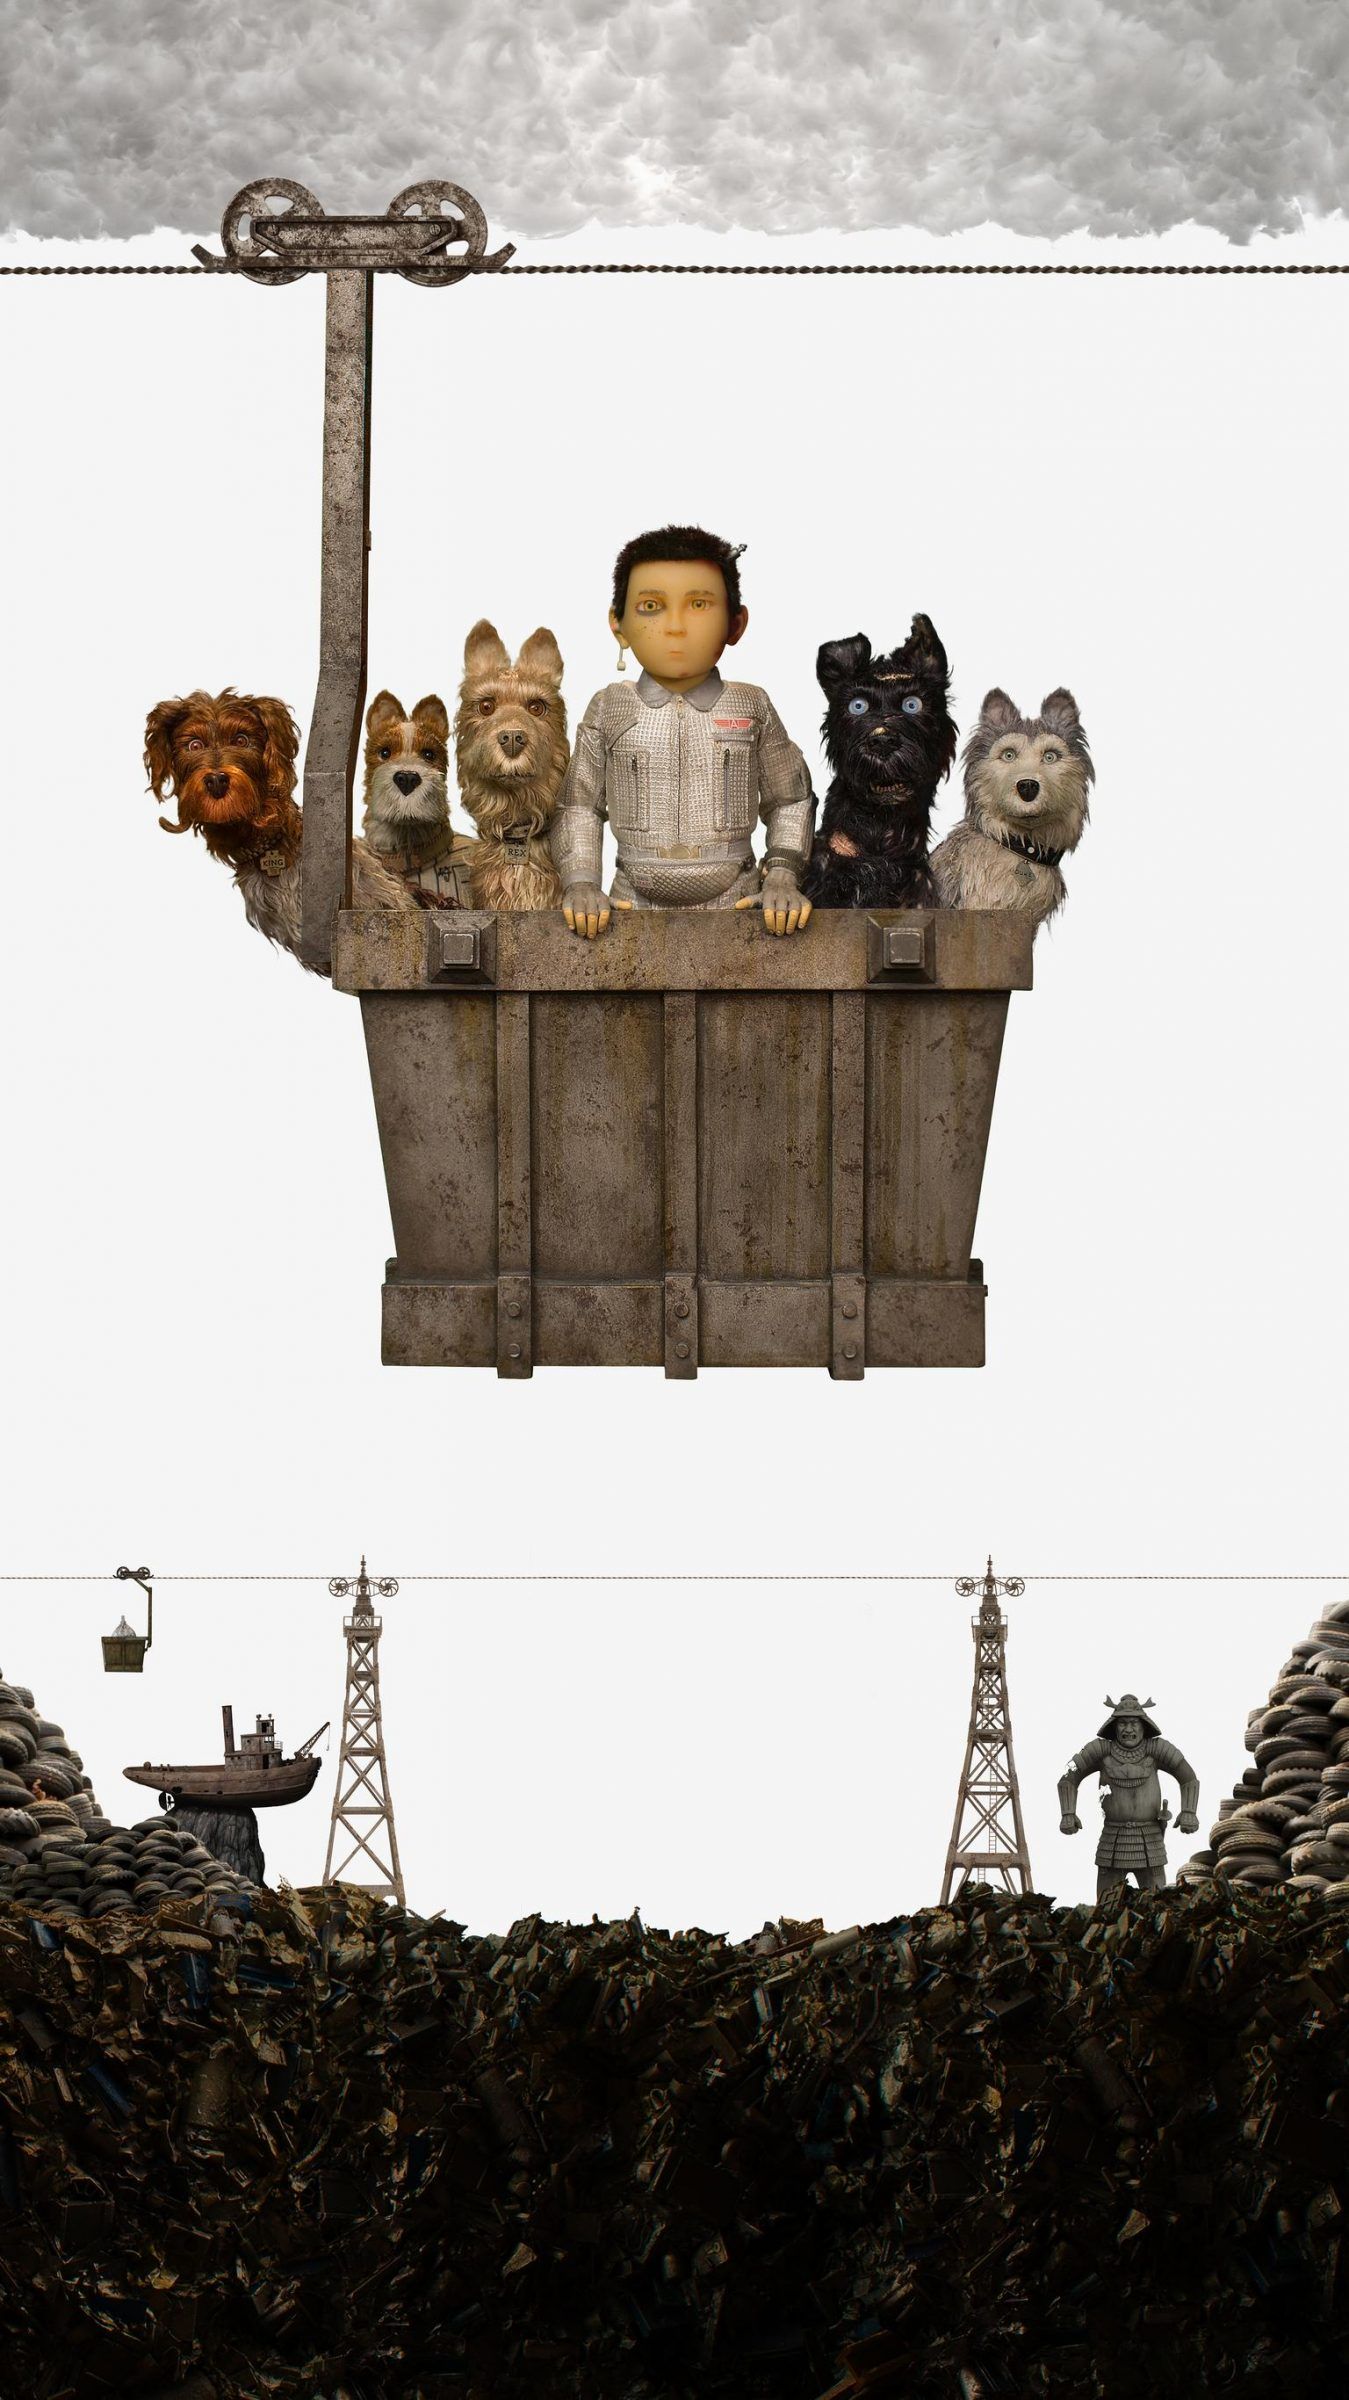 Isle of Dogs HD Wallpaperwallpaper.net. Isle of dogs movie, Isle of dogs, Wes anderson